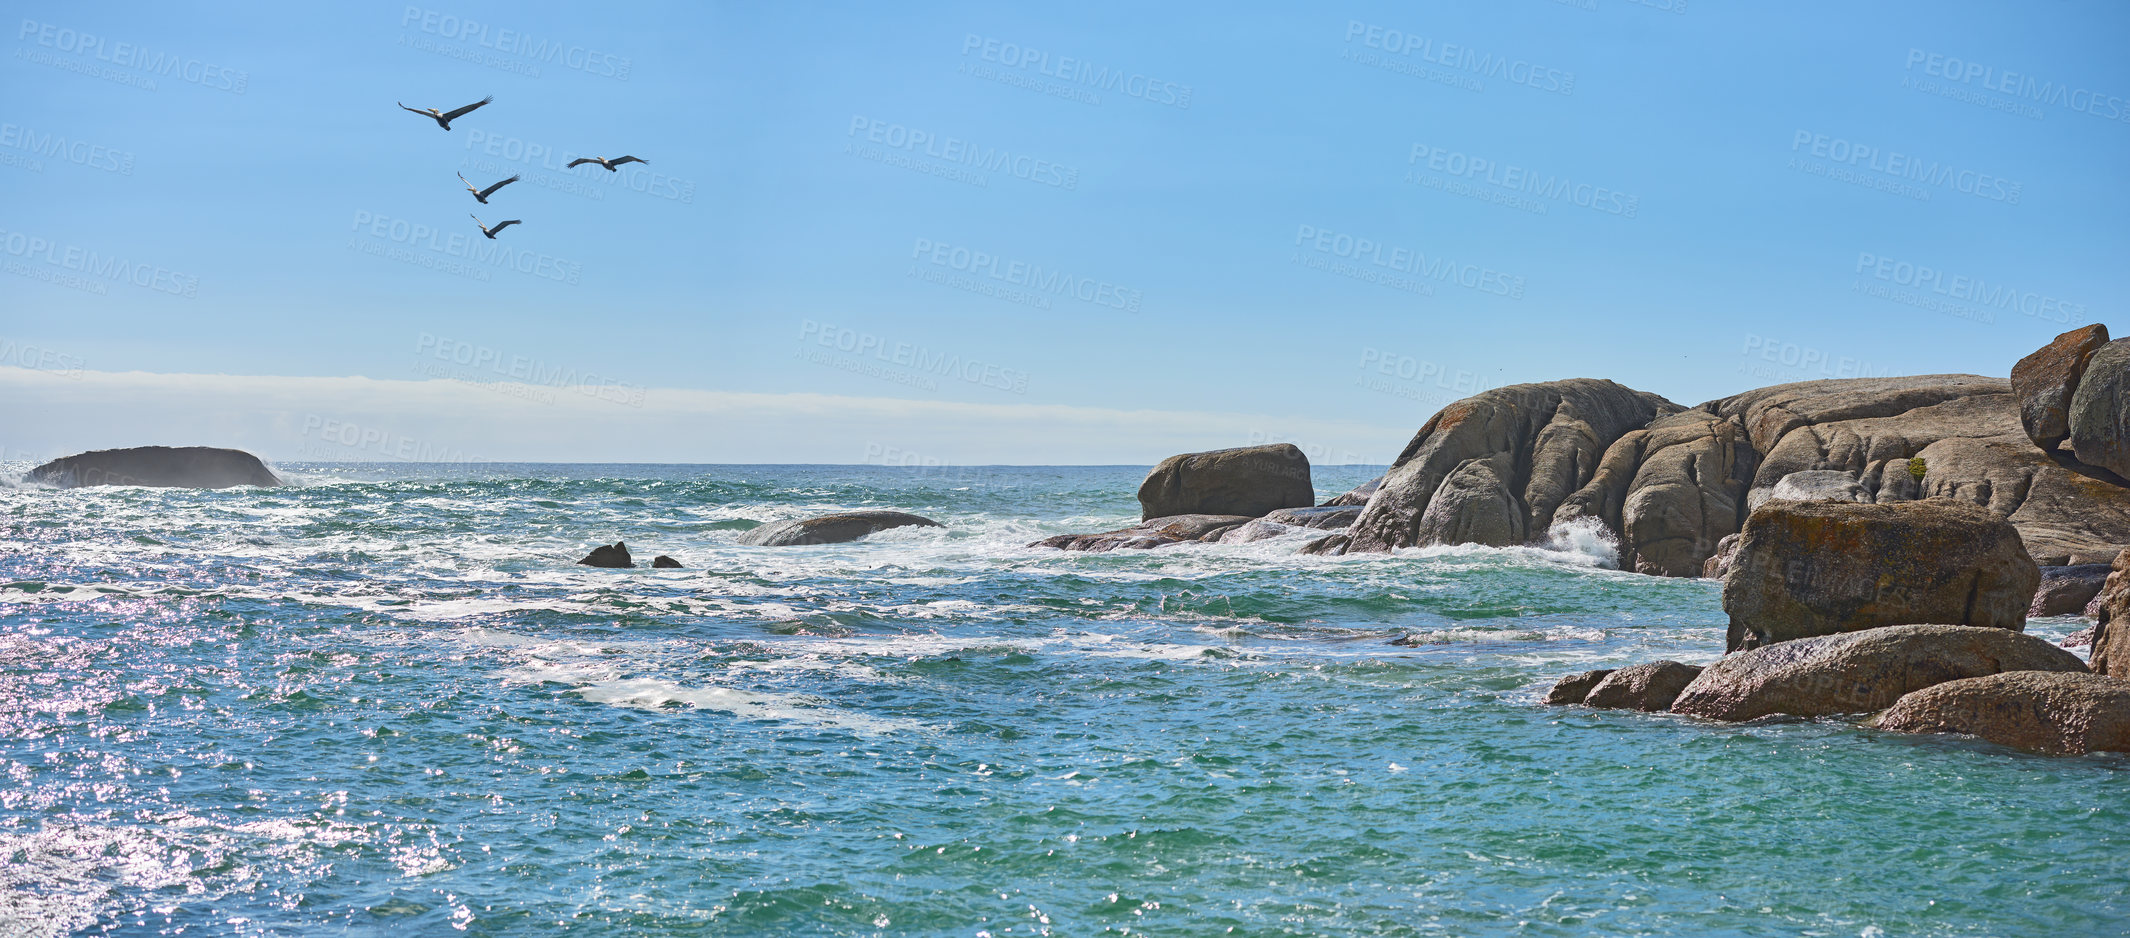 Buy stock photo Calm sea landscape with boulders on a blue horizon, sunny day in South Africa. Peaceful seascape with ocean birds over stunning turquoise water by rocky coastline with copy space at travel location